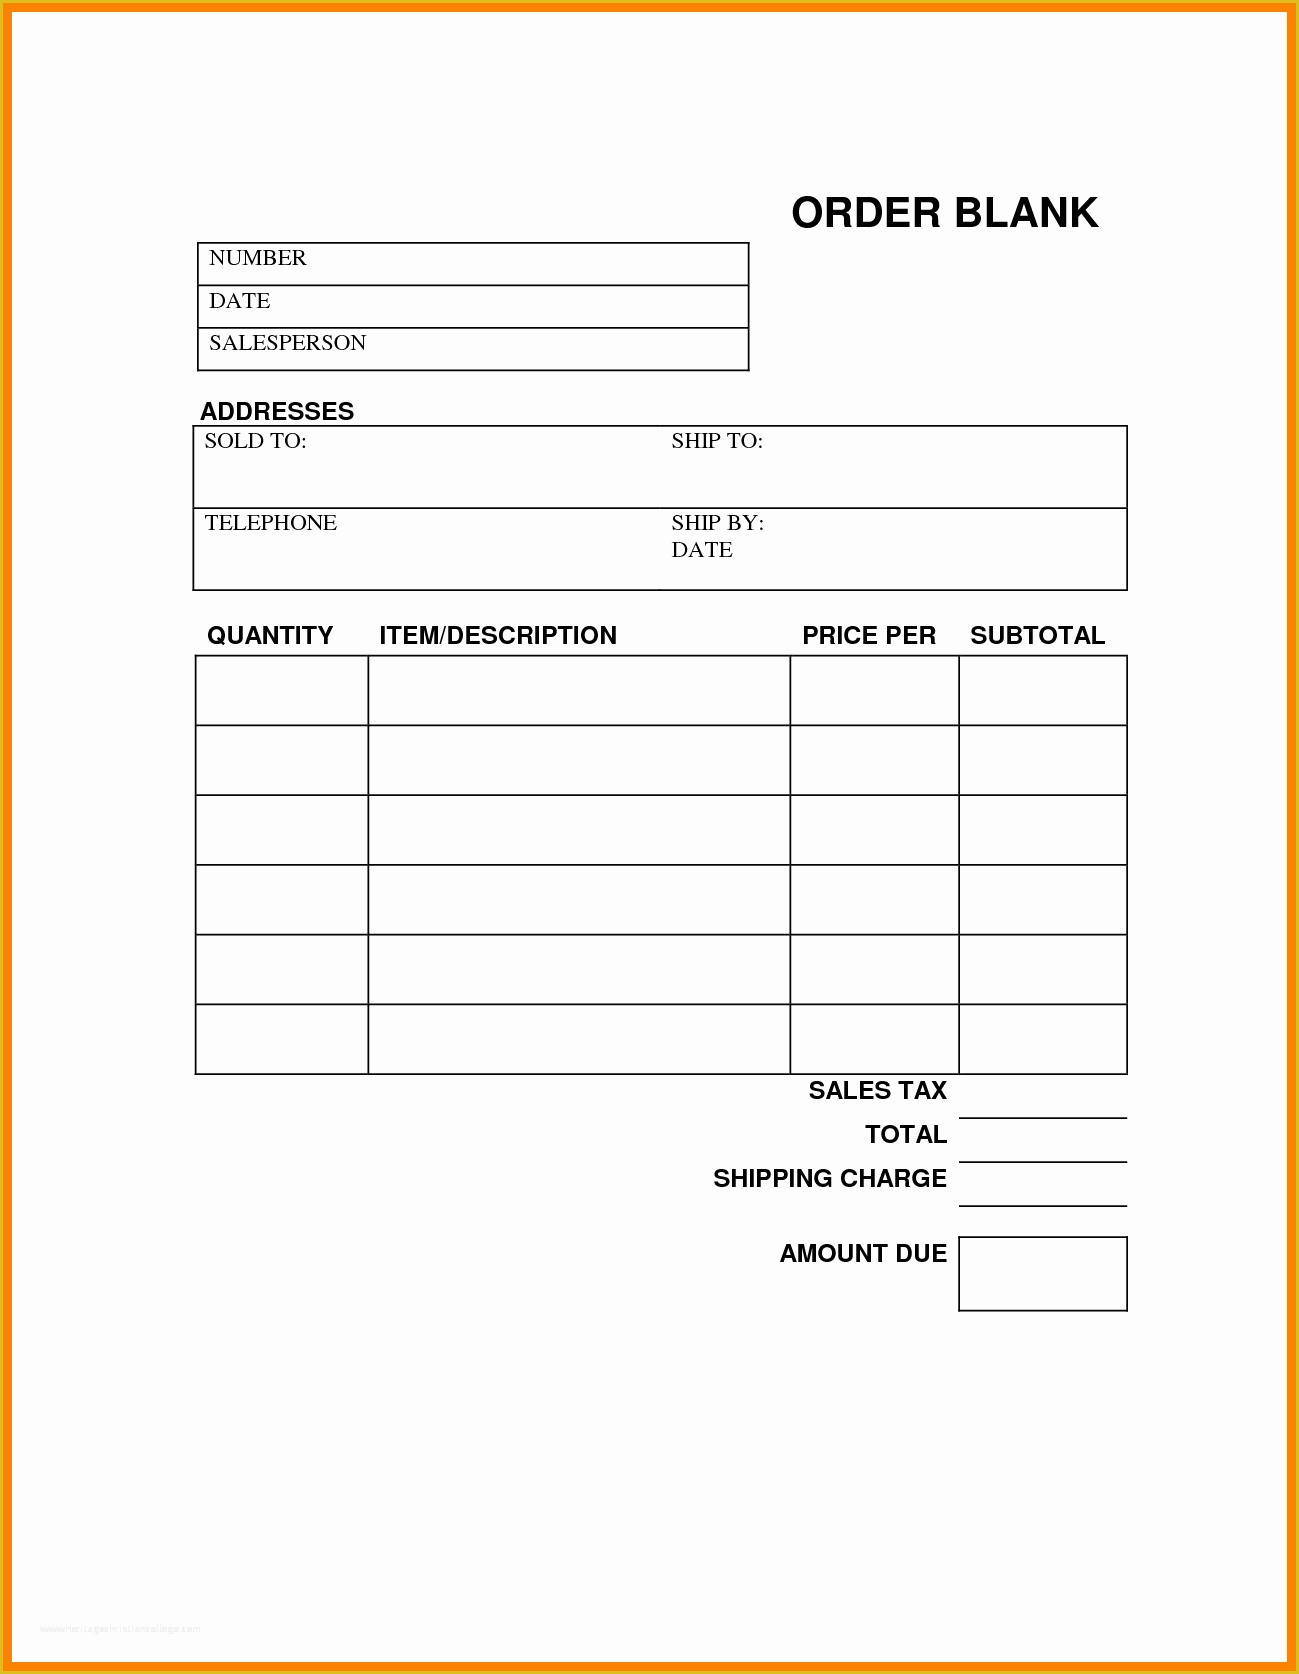 Merchandise order form Template Free Of Printable order forms Printable 360 Degree